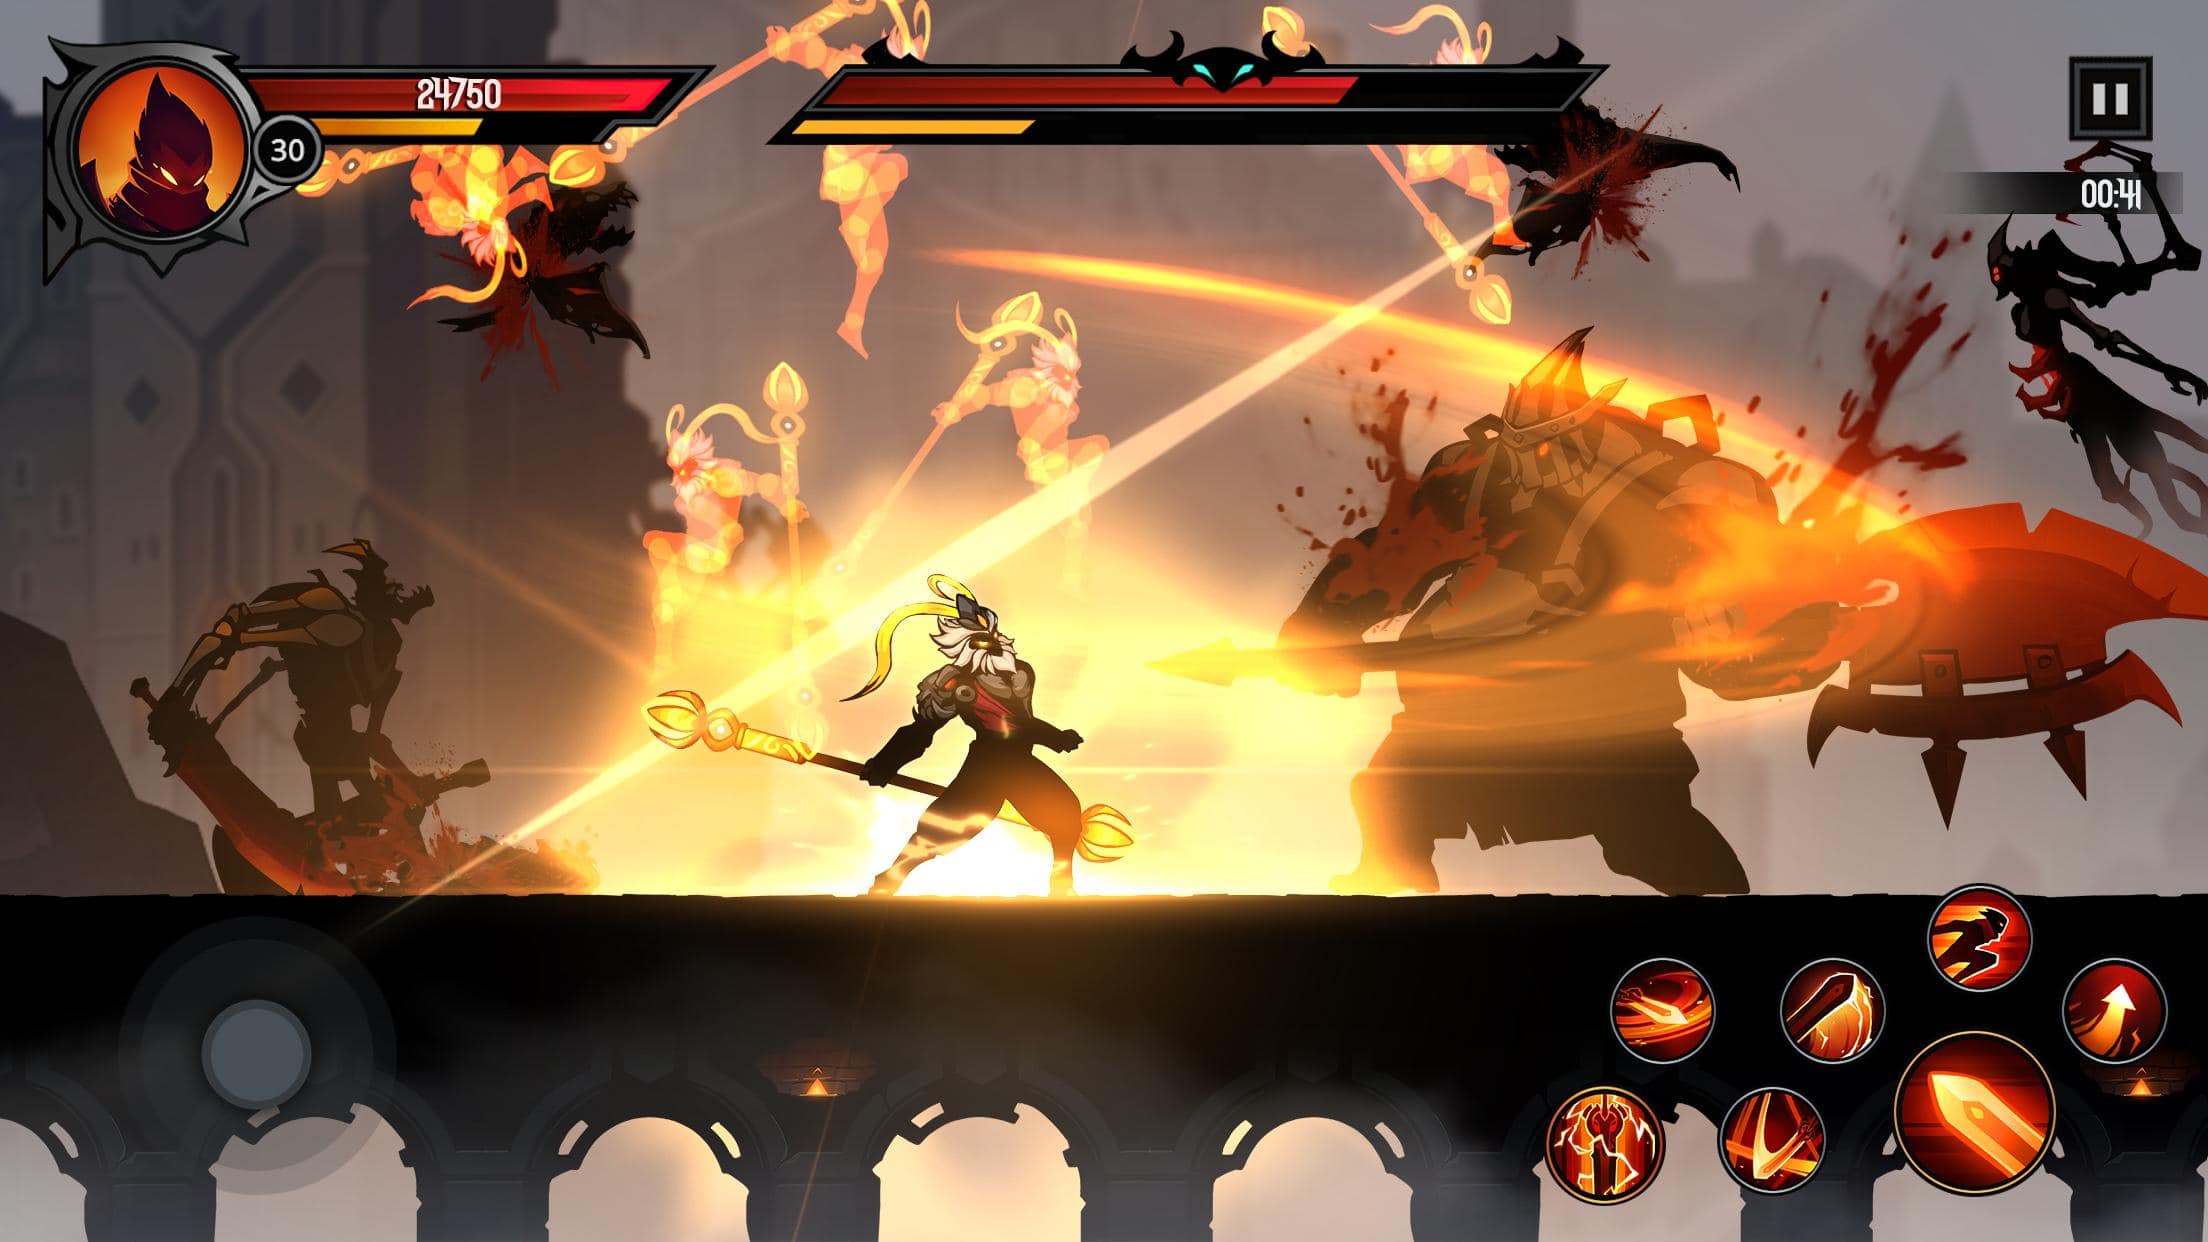 Link Tải Game Shadow Knight Ninja Fighting Cho Pc, Android, Iphone